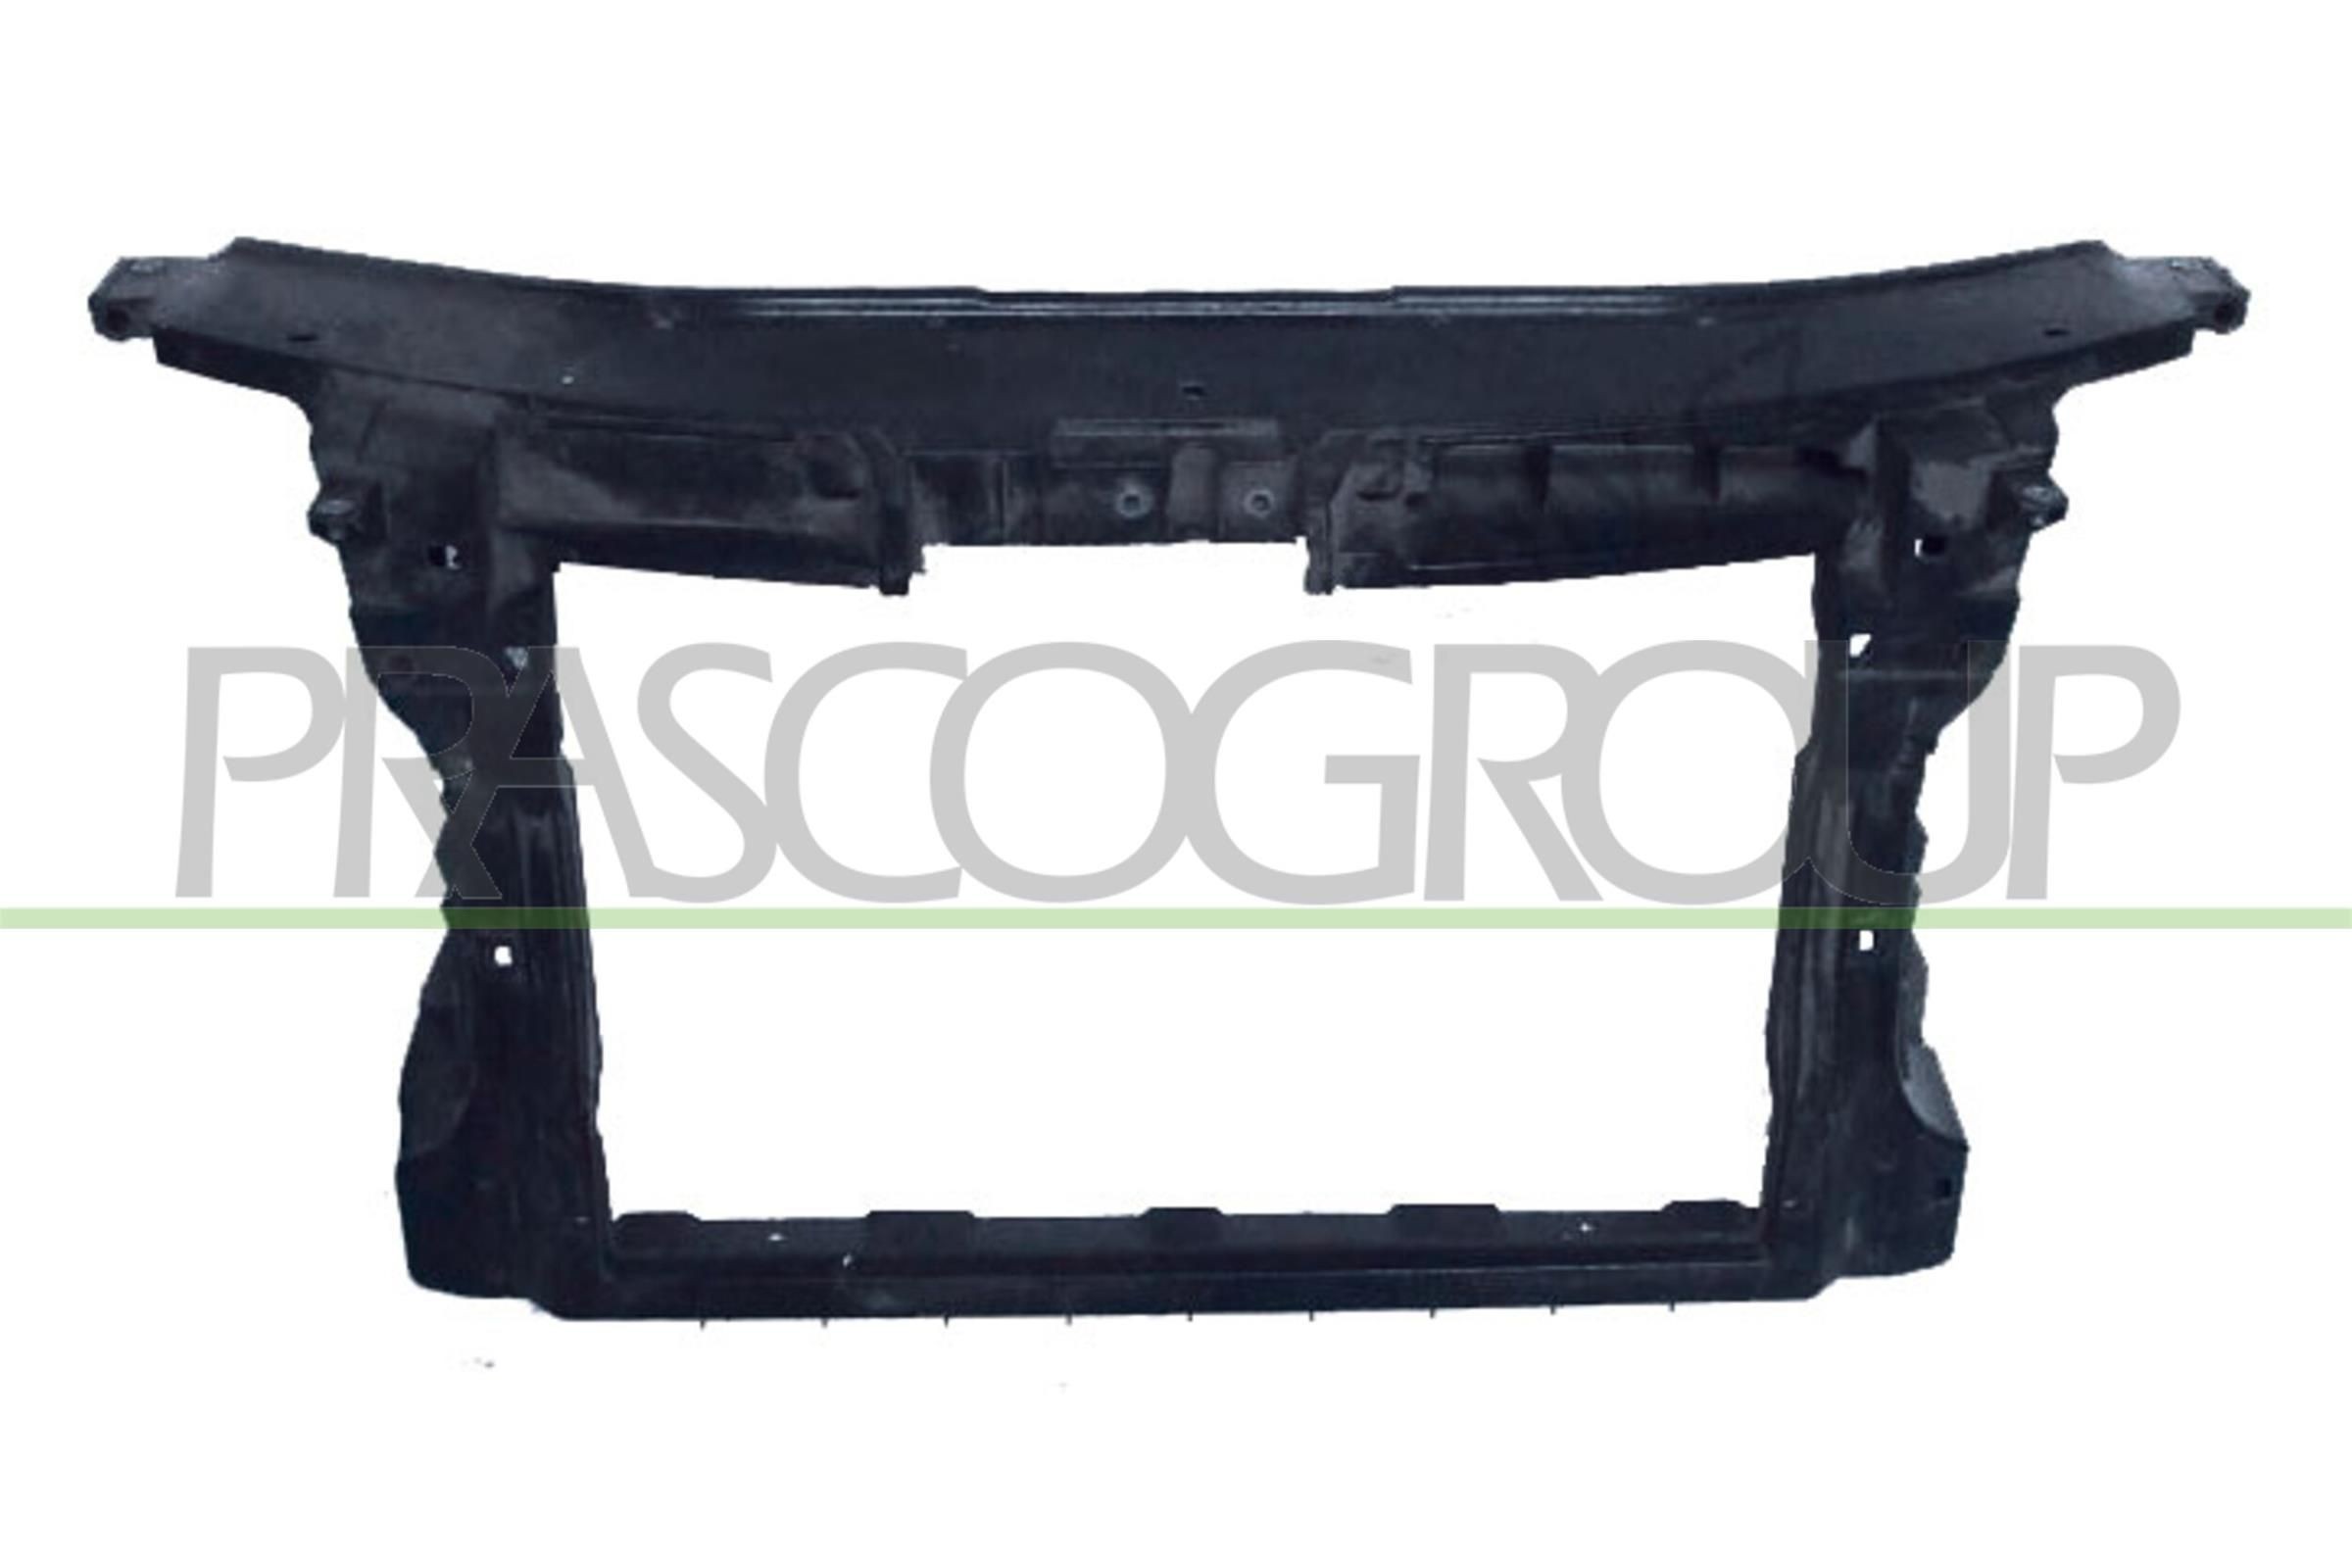 Skoda Front Cowling PRASCO SK4203210 at a good price